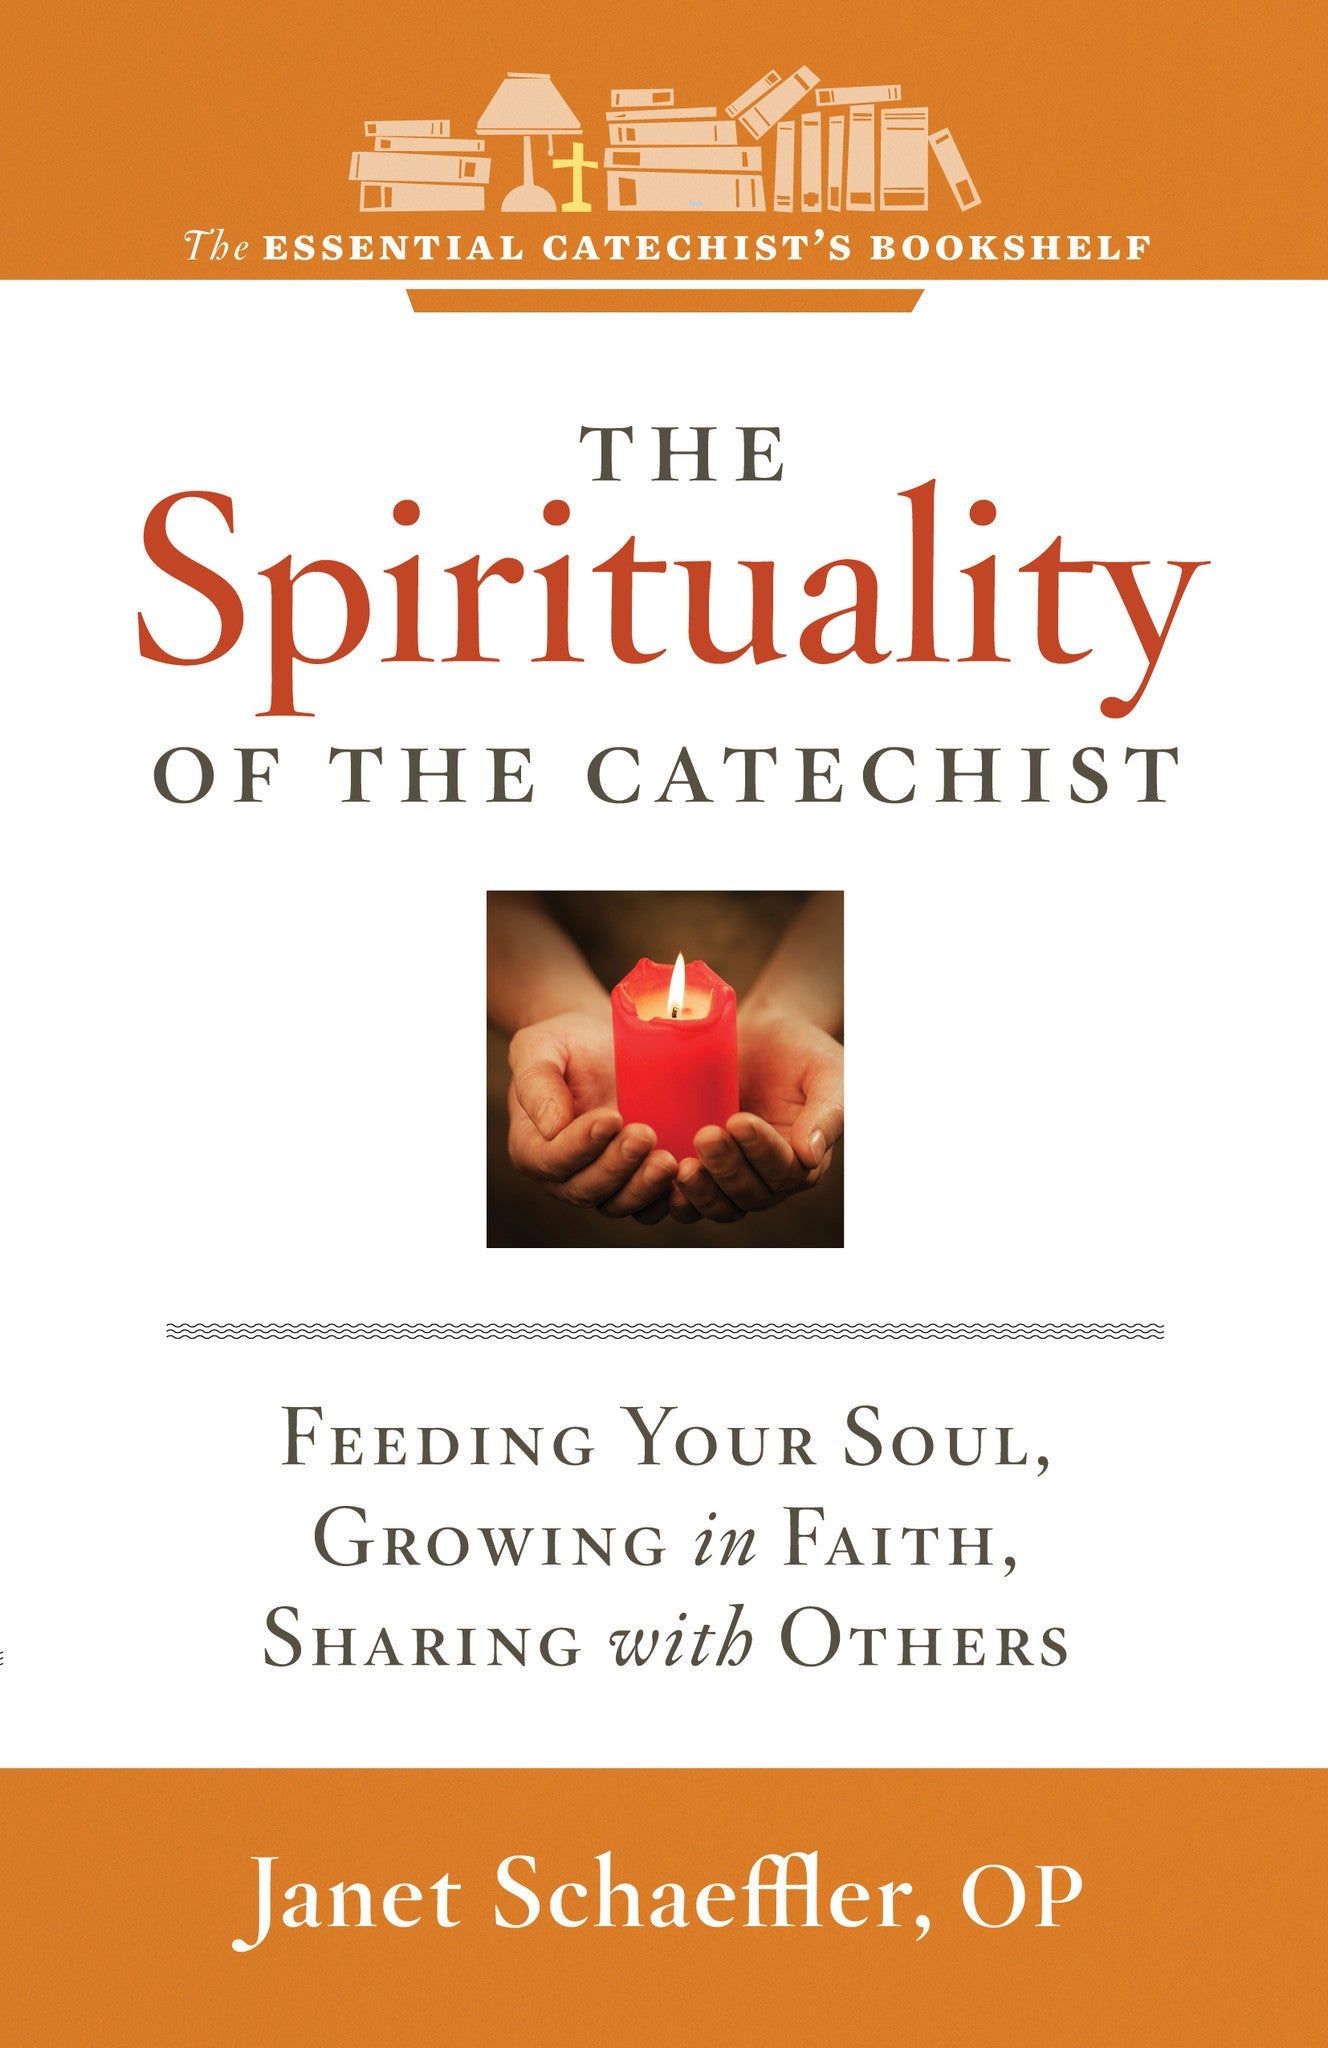 SALE - The Spirituality of the Catechist